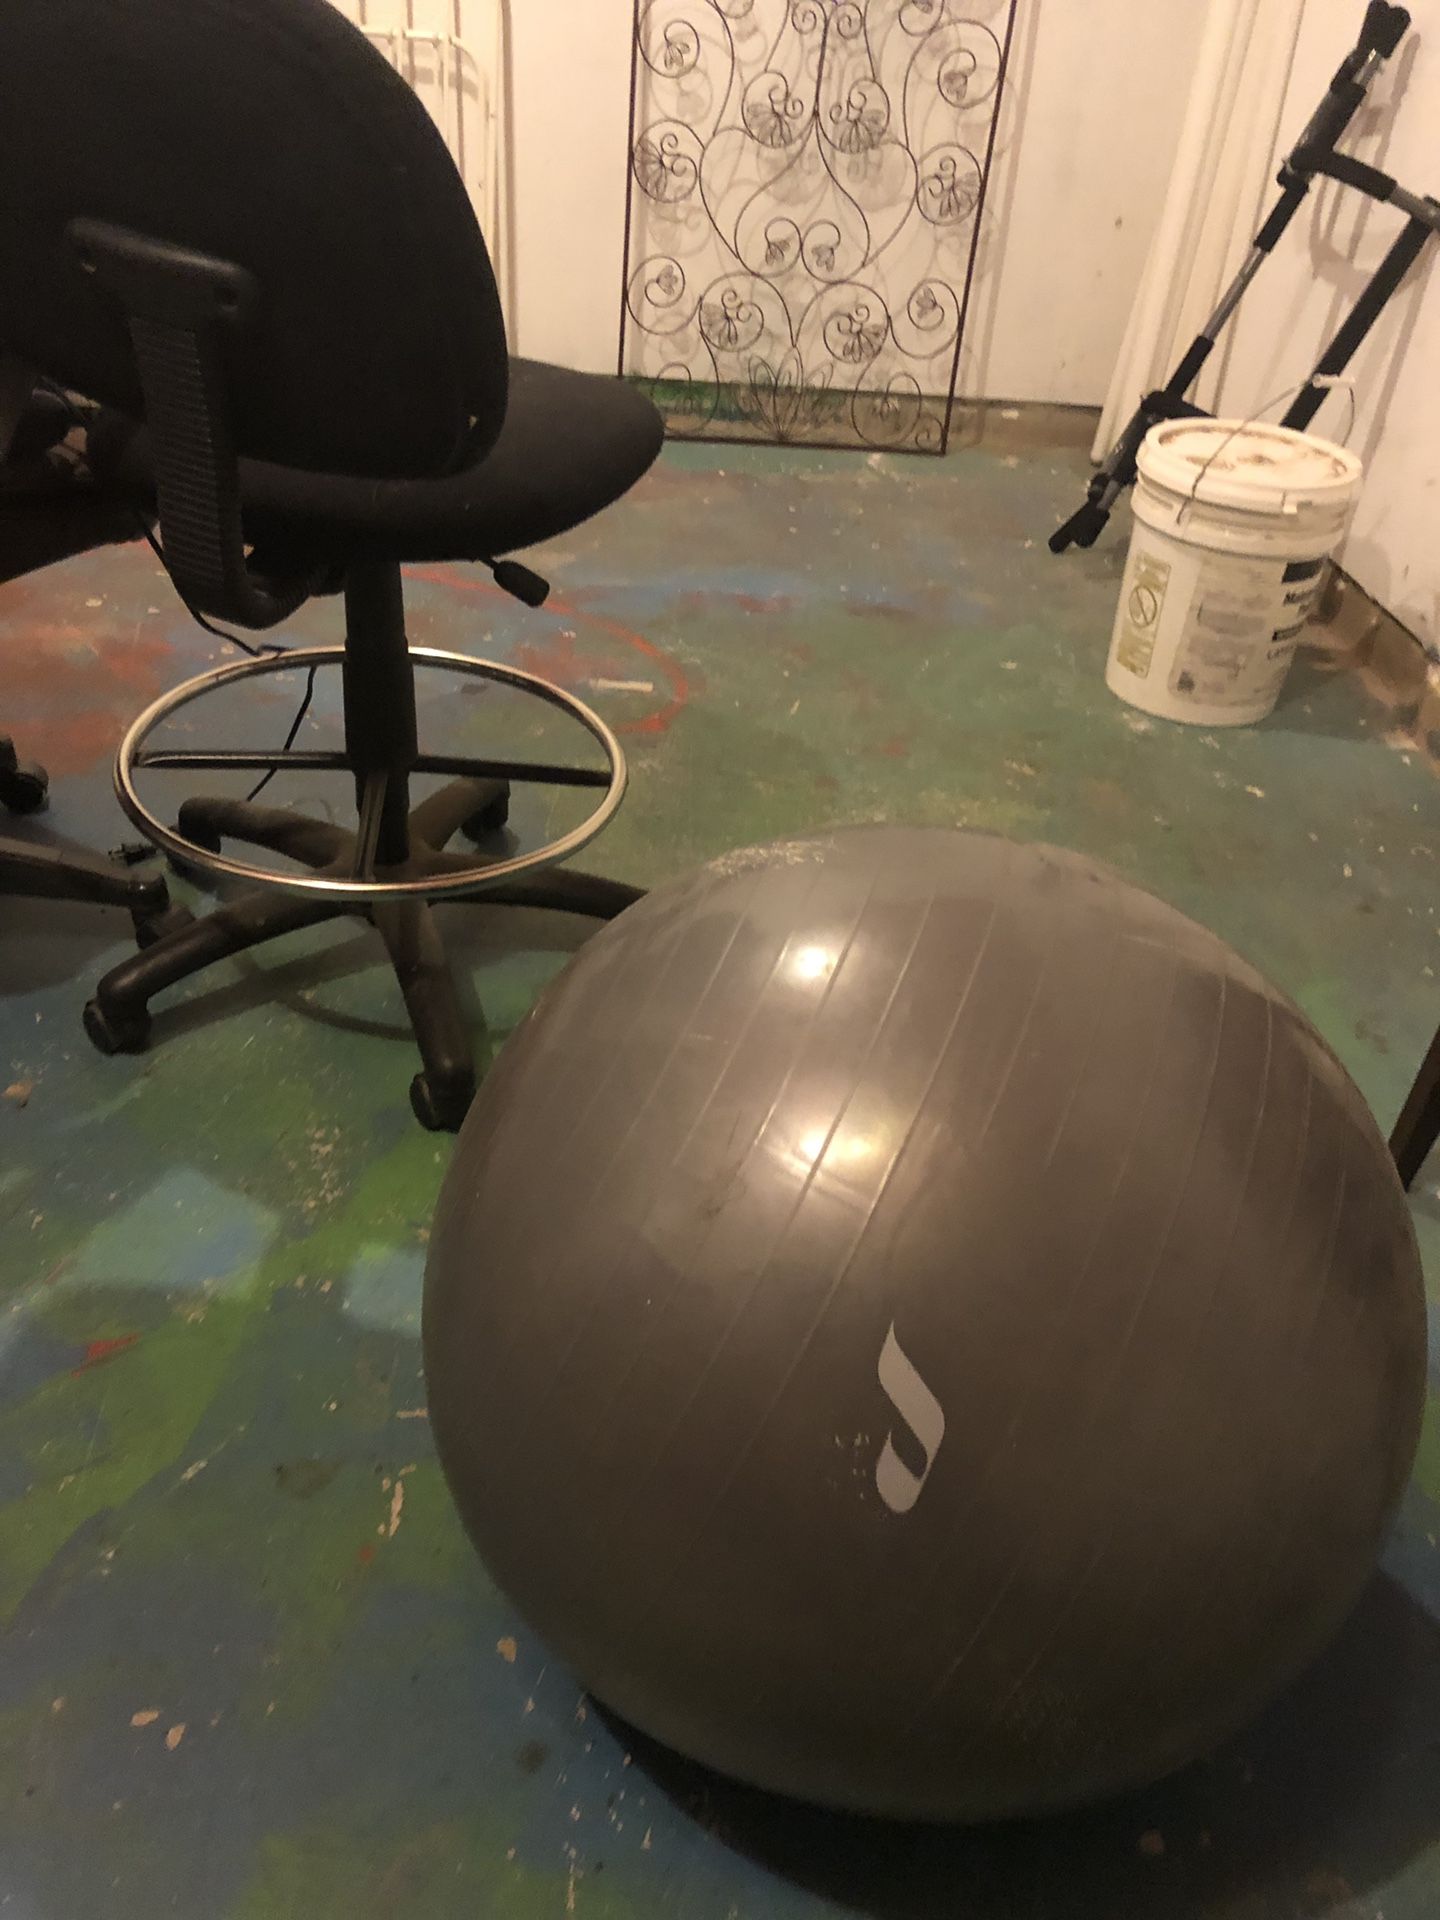 Free yoga ball with purchase of pull-up bar